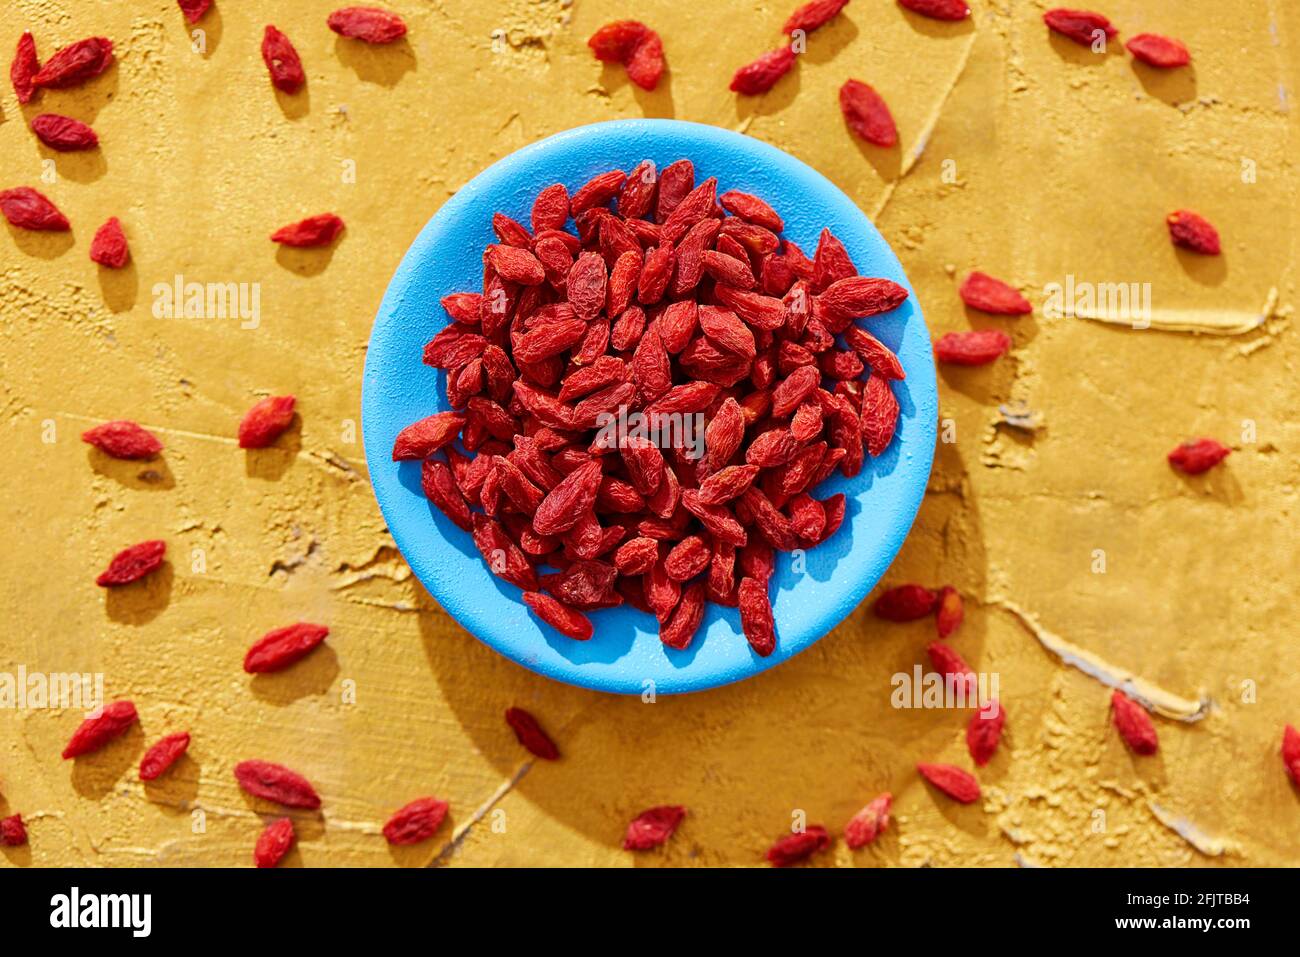 high angle view of some dried goji berries in a blue plate and sprinkled on a golden textured surface Stock Photo